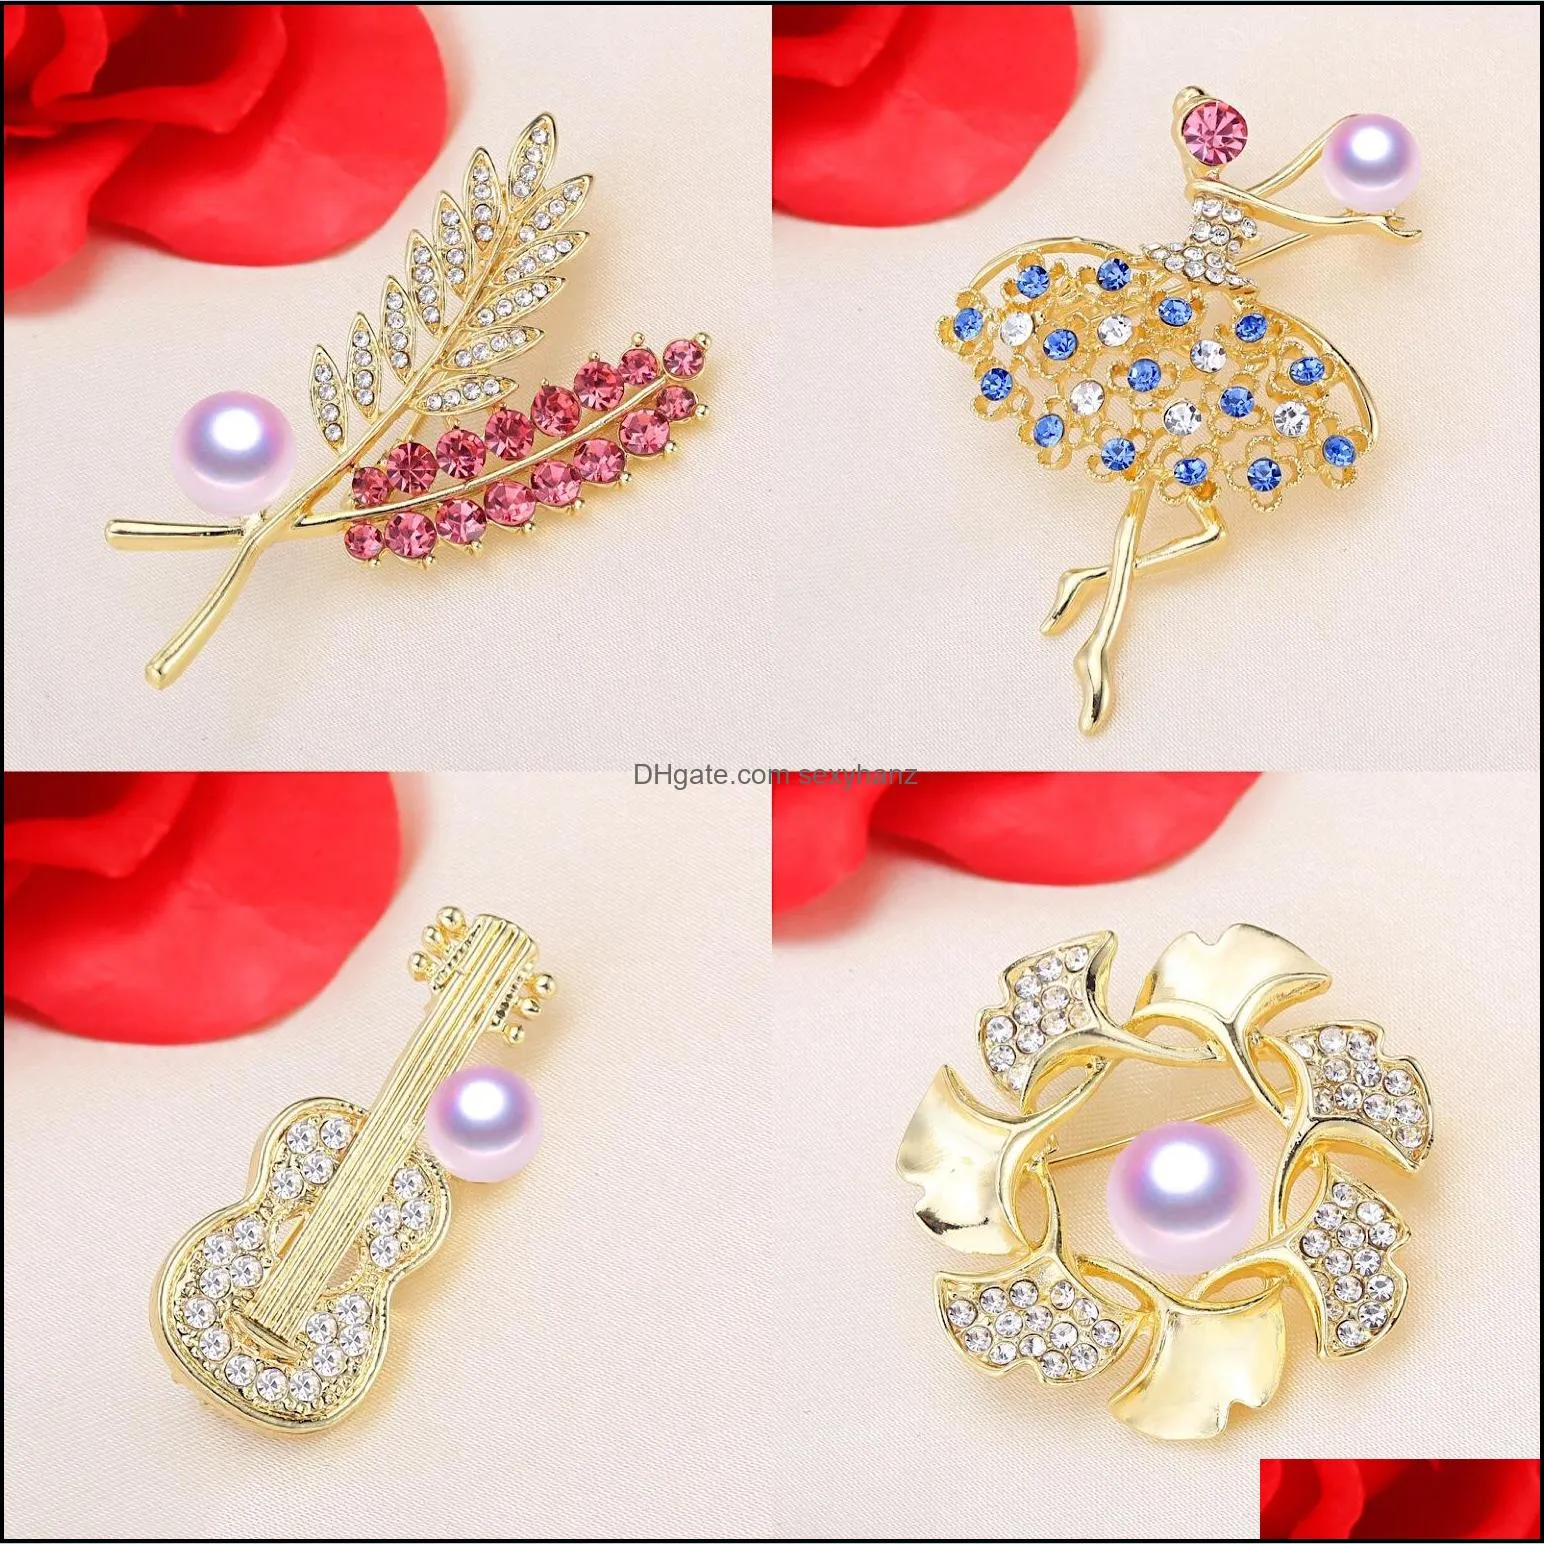 Pins, Brooches 100% Pearl Brooch For Women Zircon Pins 7-10Mm 36 Styles Crystal Jewelry Christmas Gift Present 4Pcs/Lot Drop Dhgarden Dhvre